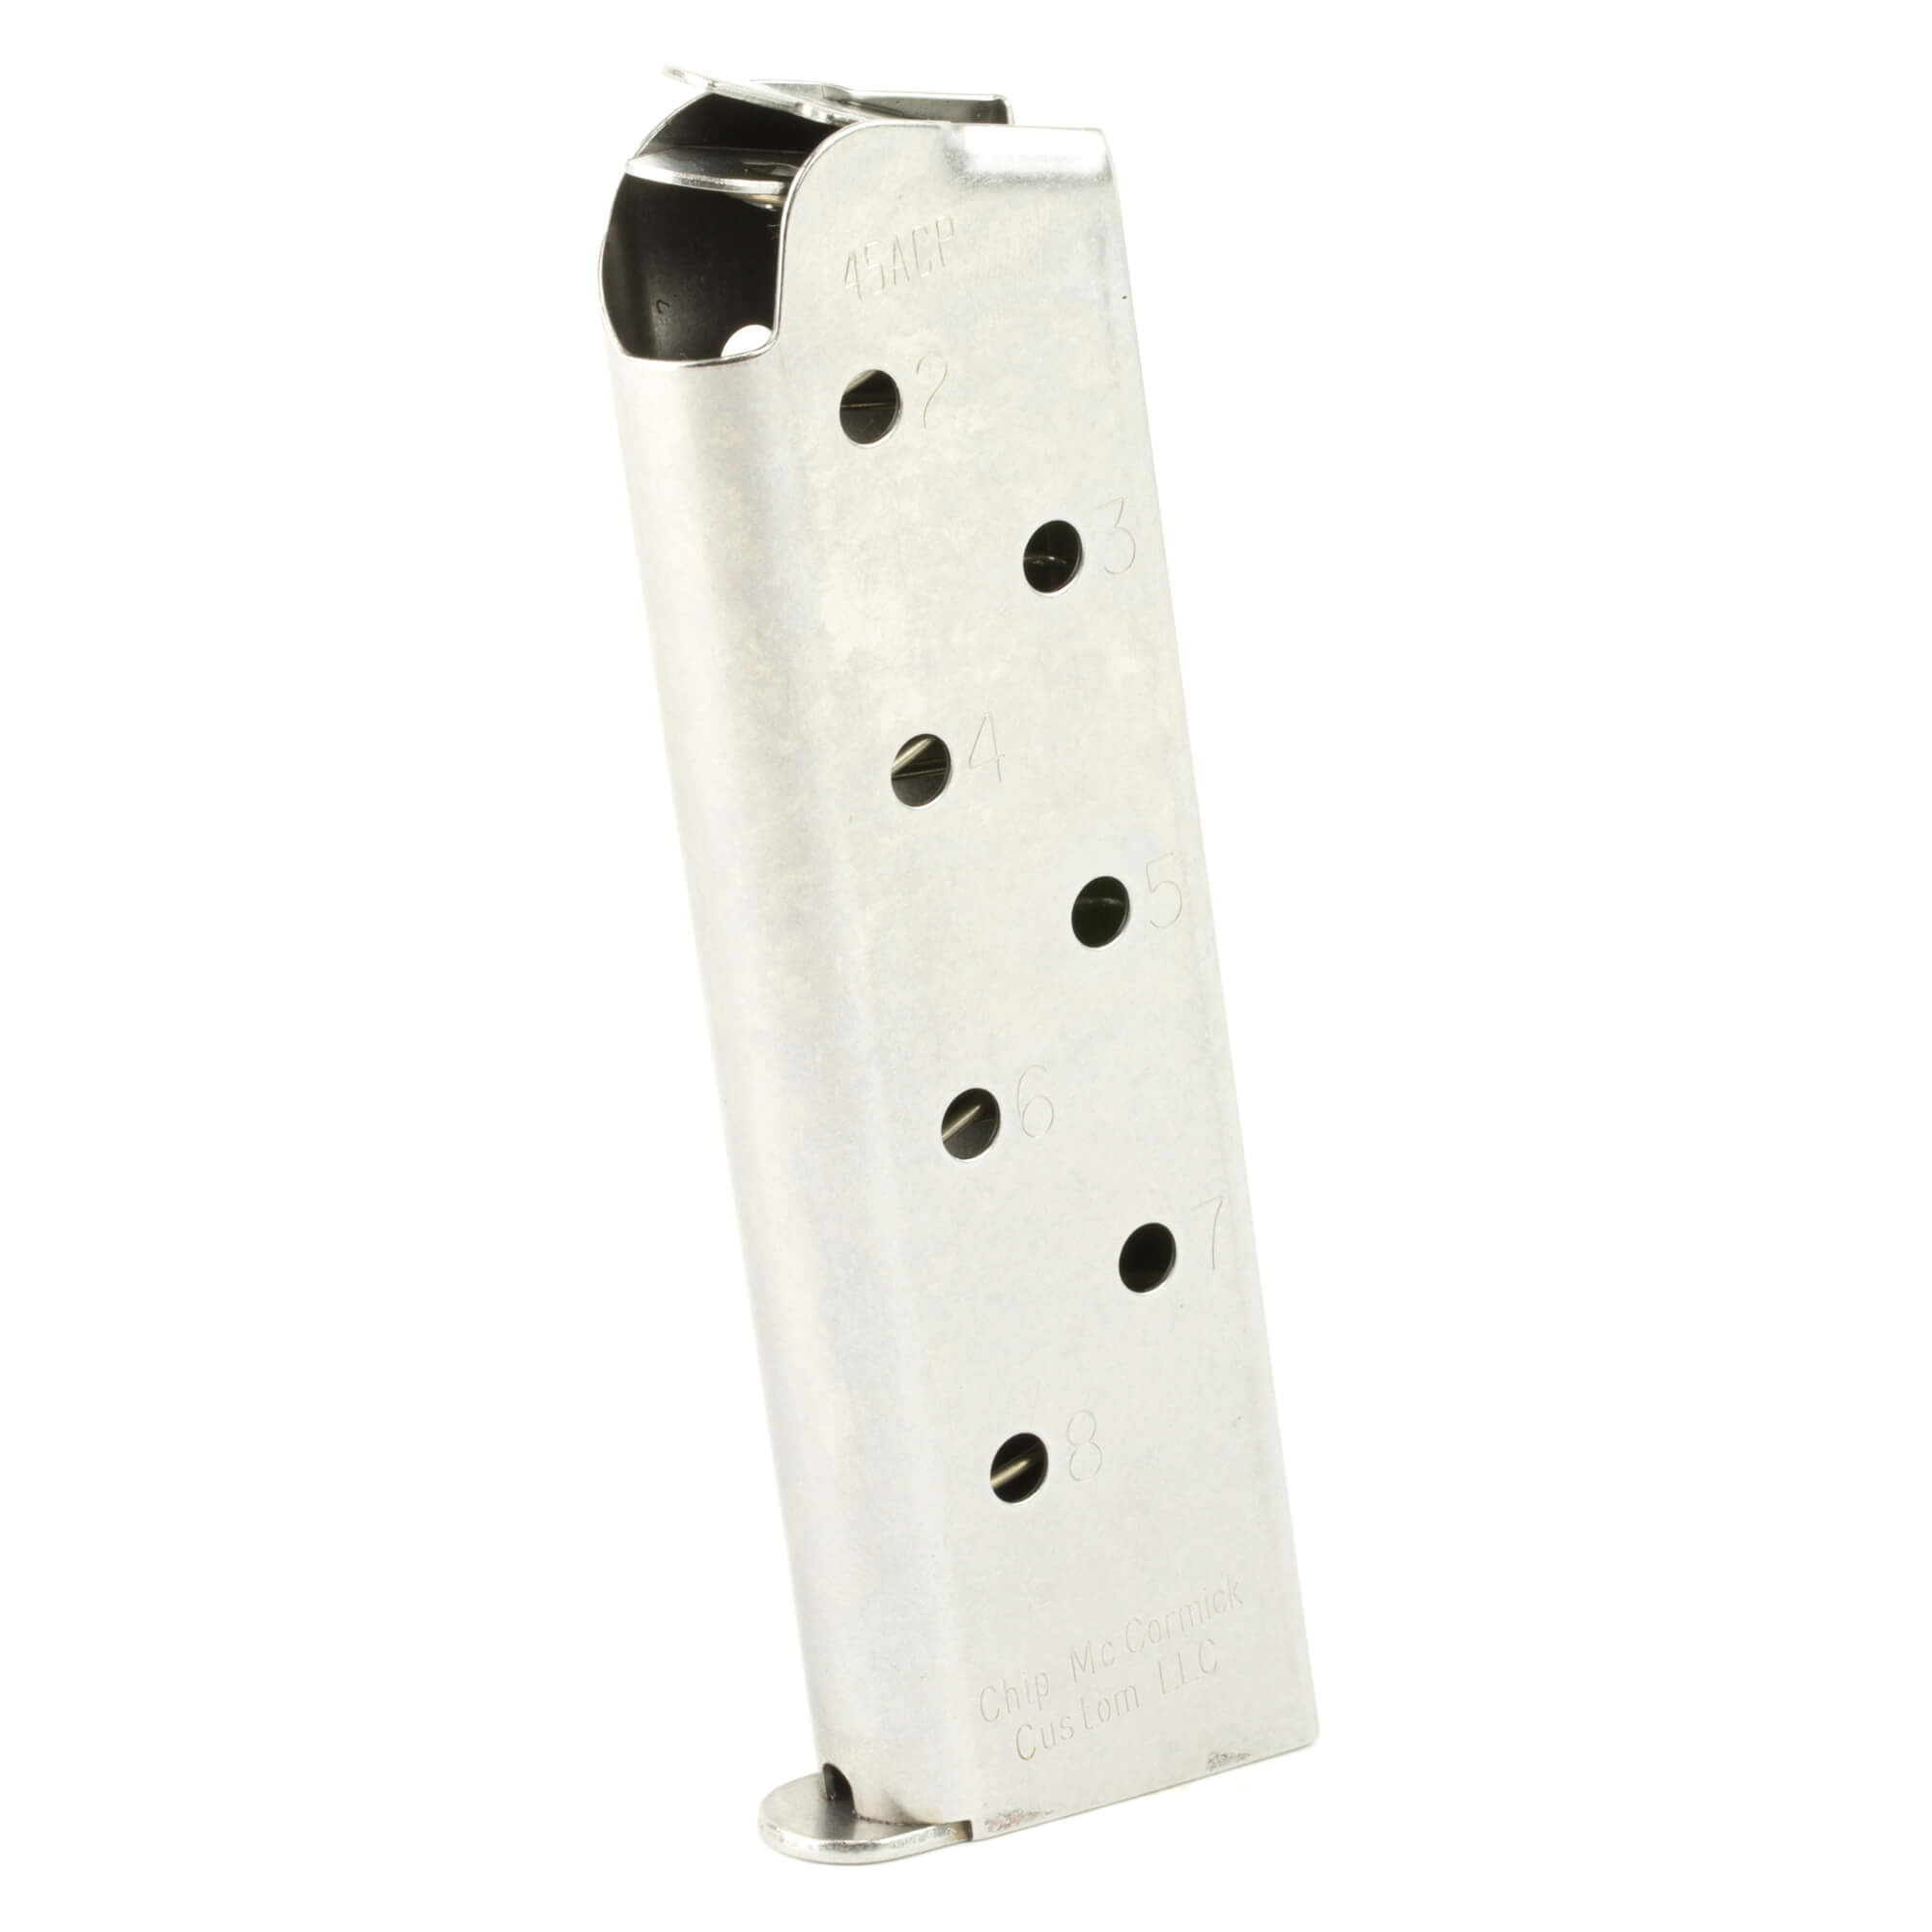 Chip Mccormick Custom Match Grade 1911 Full Size 8 Round Magazine In 45 Acp Stainless Steel 4382